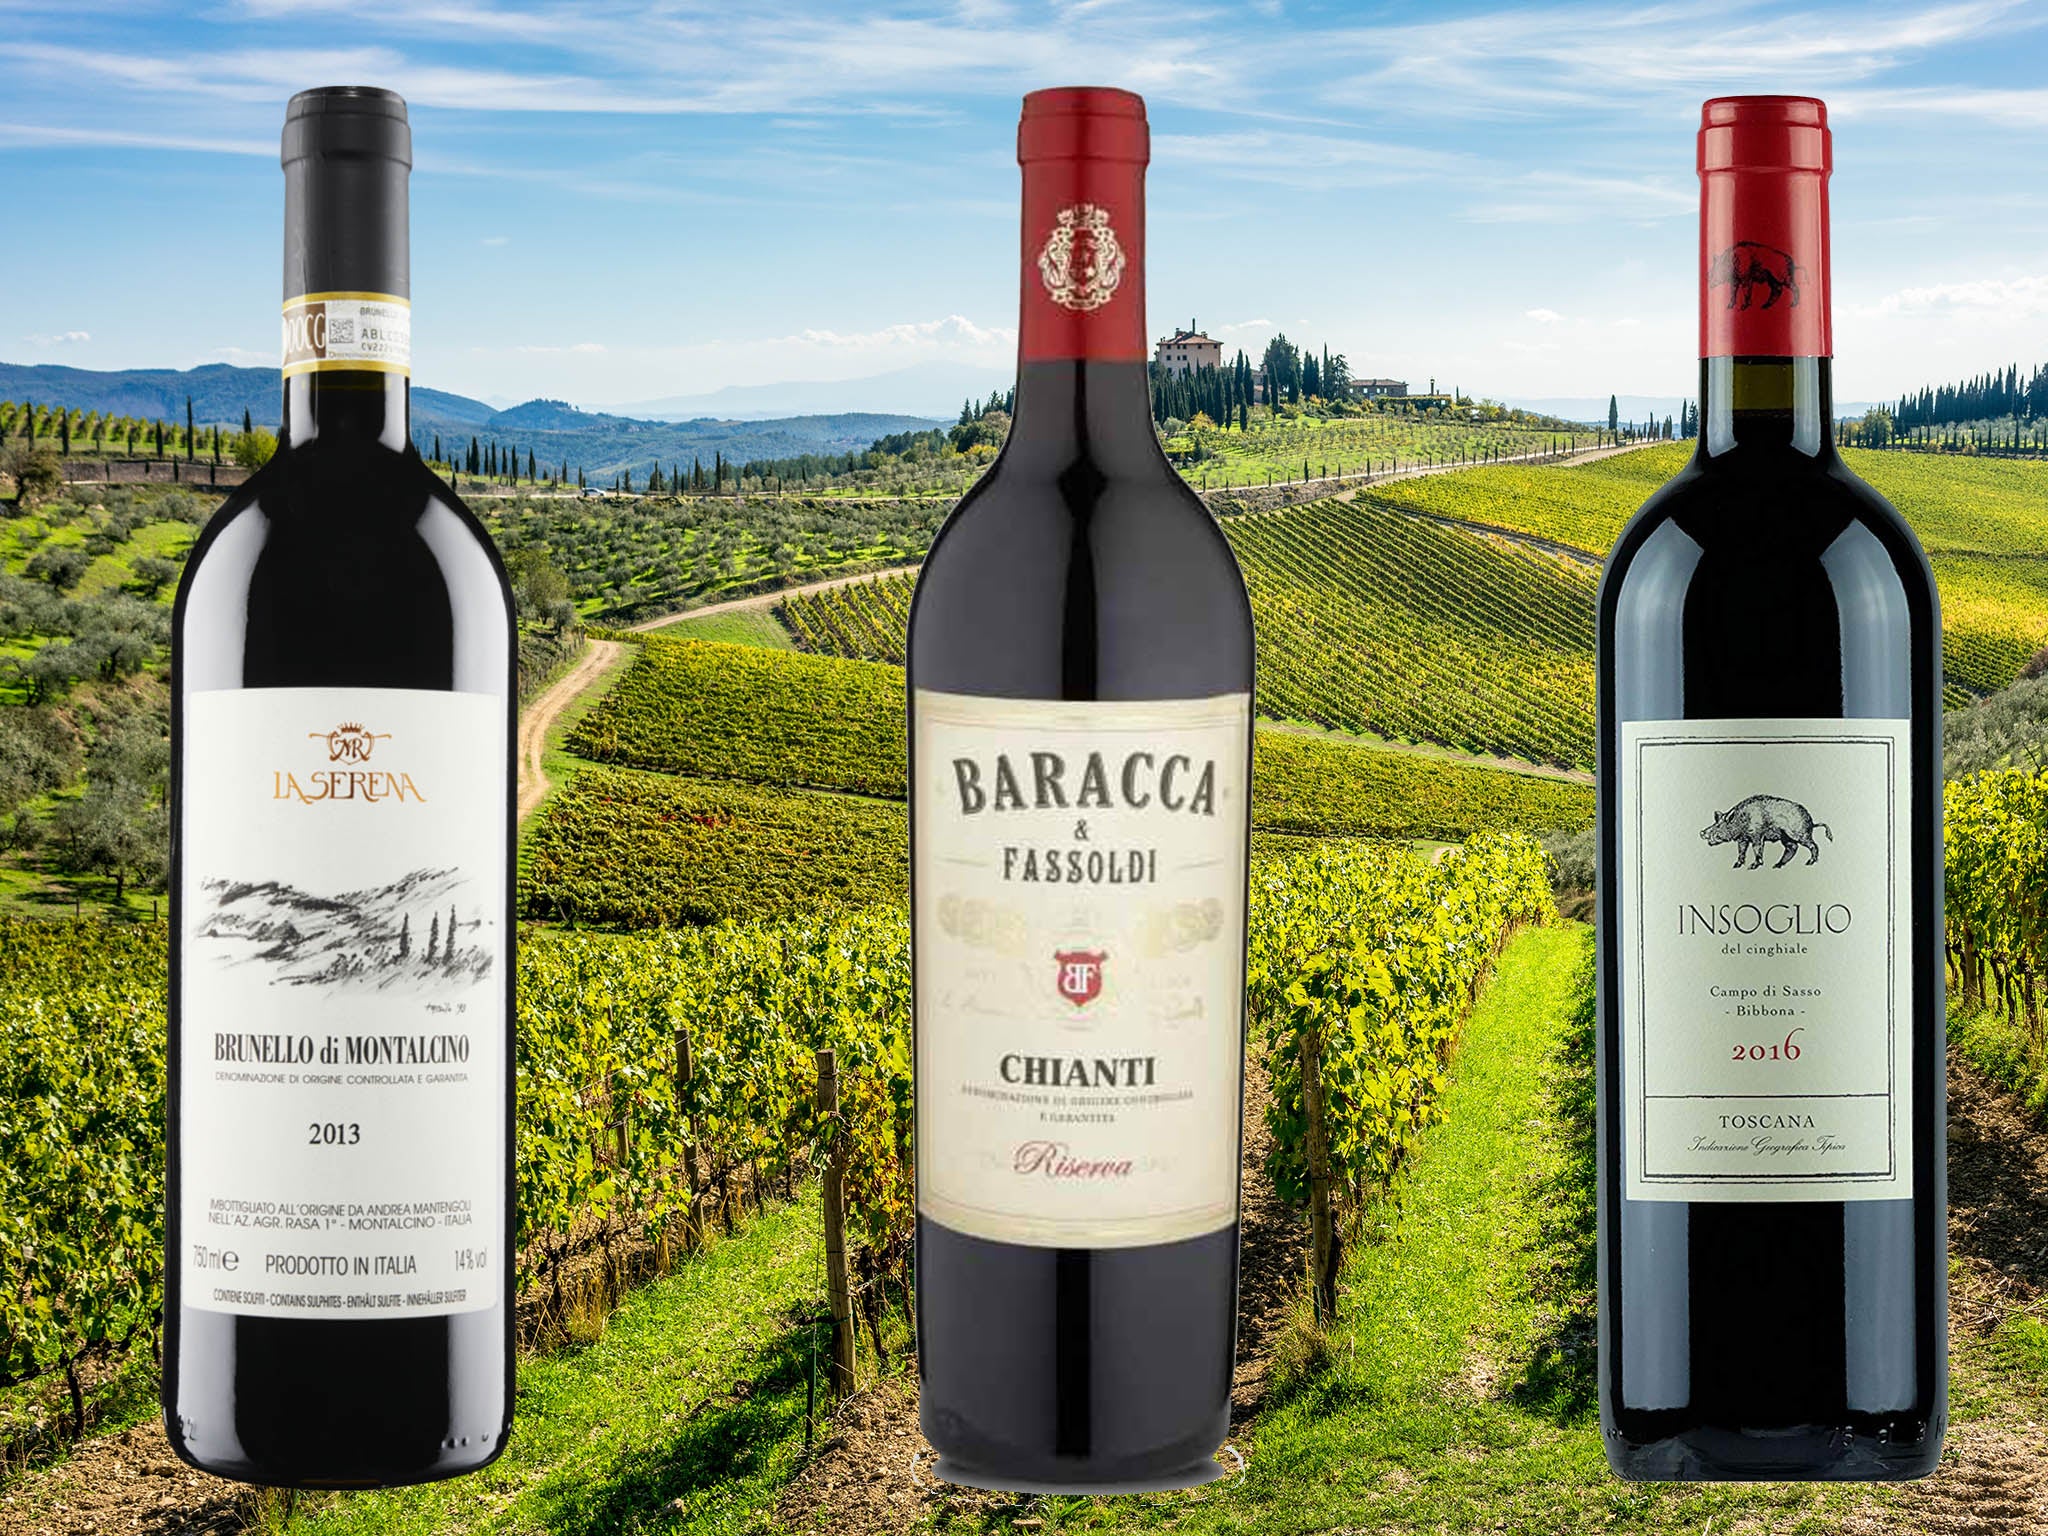 Home to some of the country's most celebrated wine, the region is best known for its reds made predominantly from sangiovese grapes